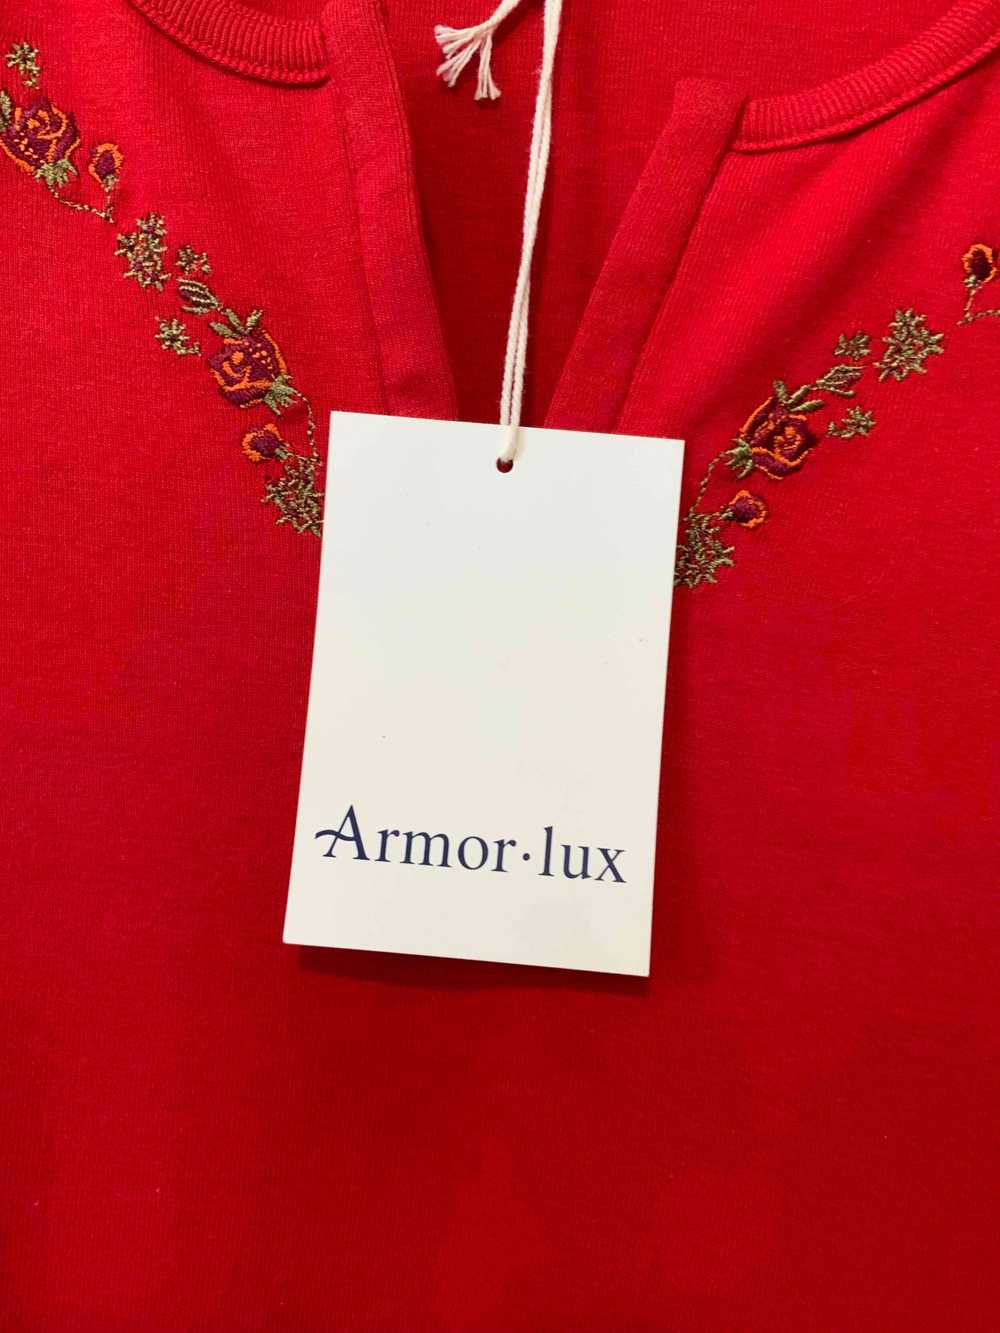 Top Armor Lux - T shirt Embroidered Flowers Armor… - image 4